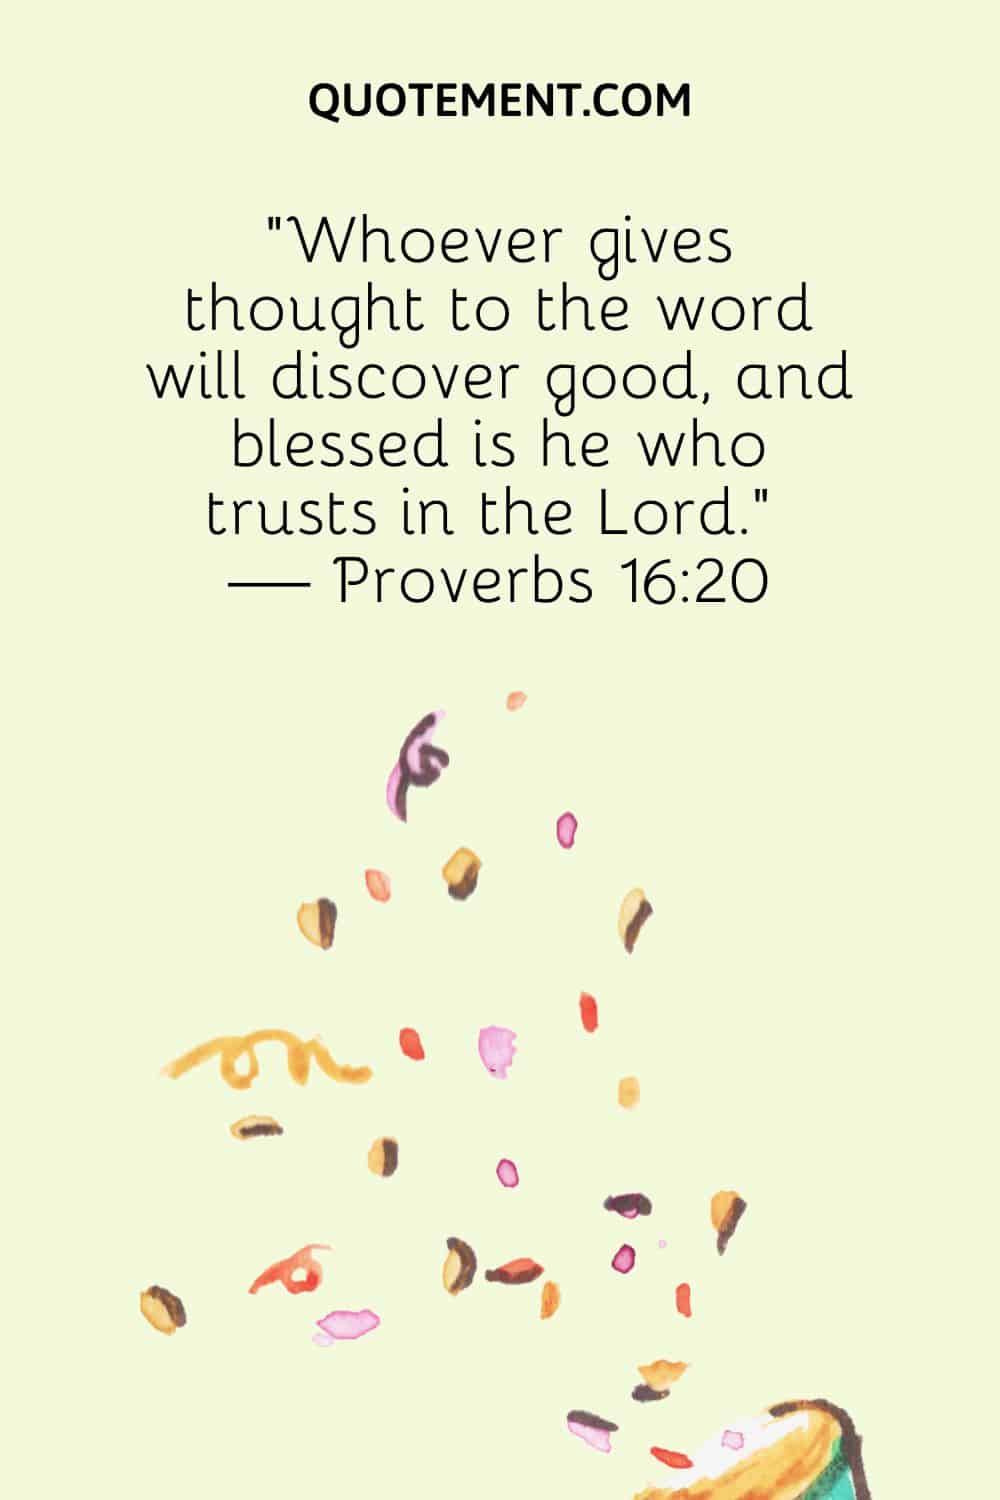 Whoever gives thought to the word will discover good, and blessed is he who trusts in the Lord